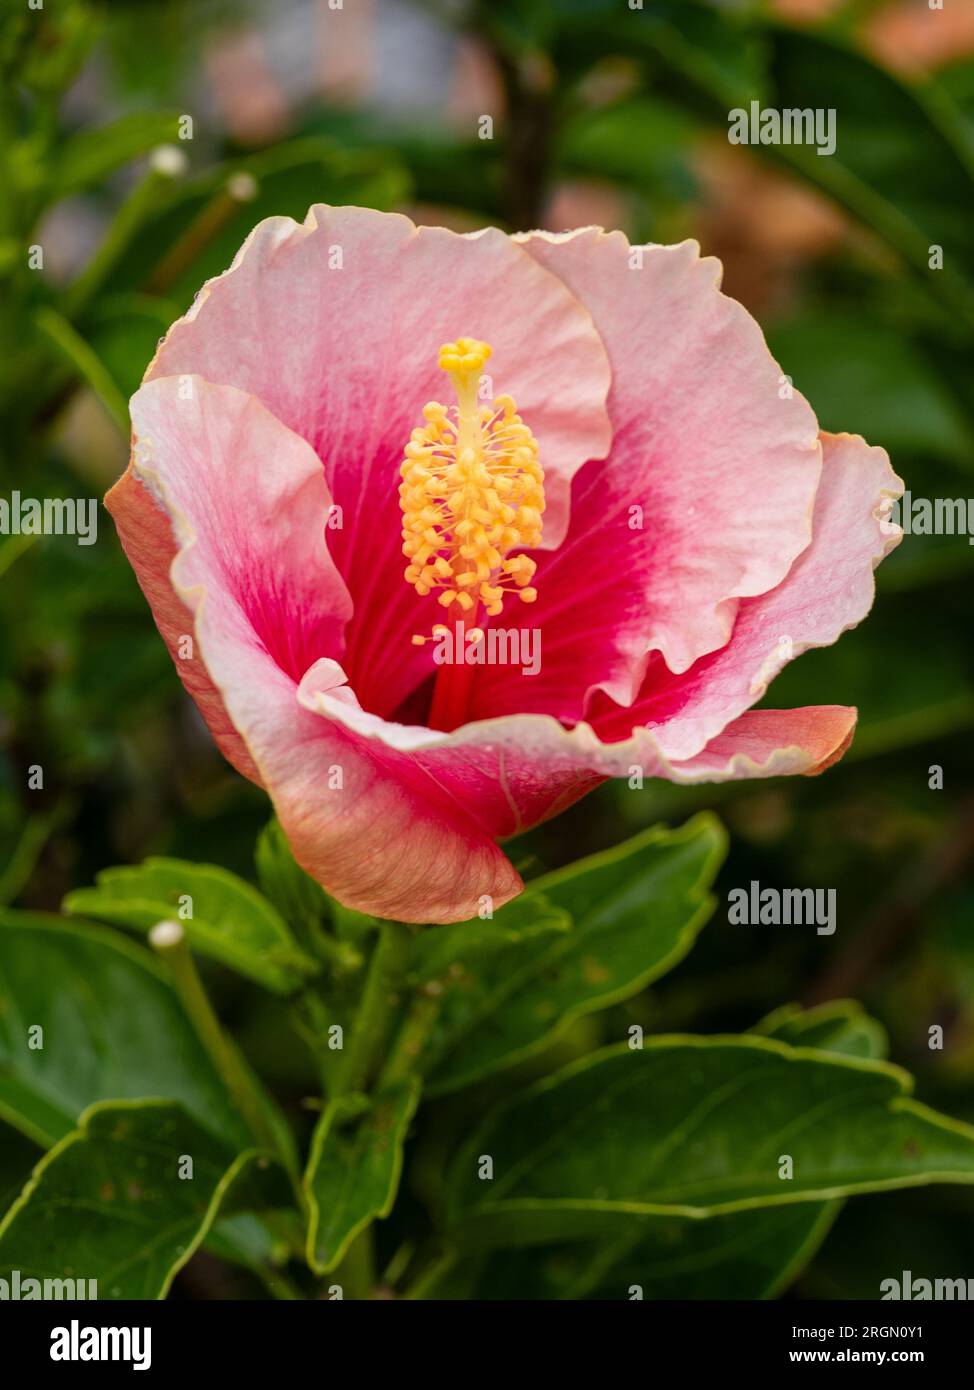 Hibiscus flower opening with large petals in two shades of pink, with frilly edges and yellow stamens Stock Photo